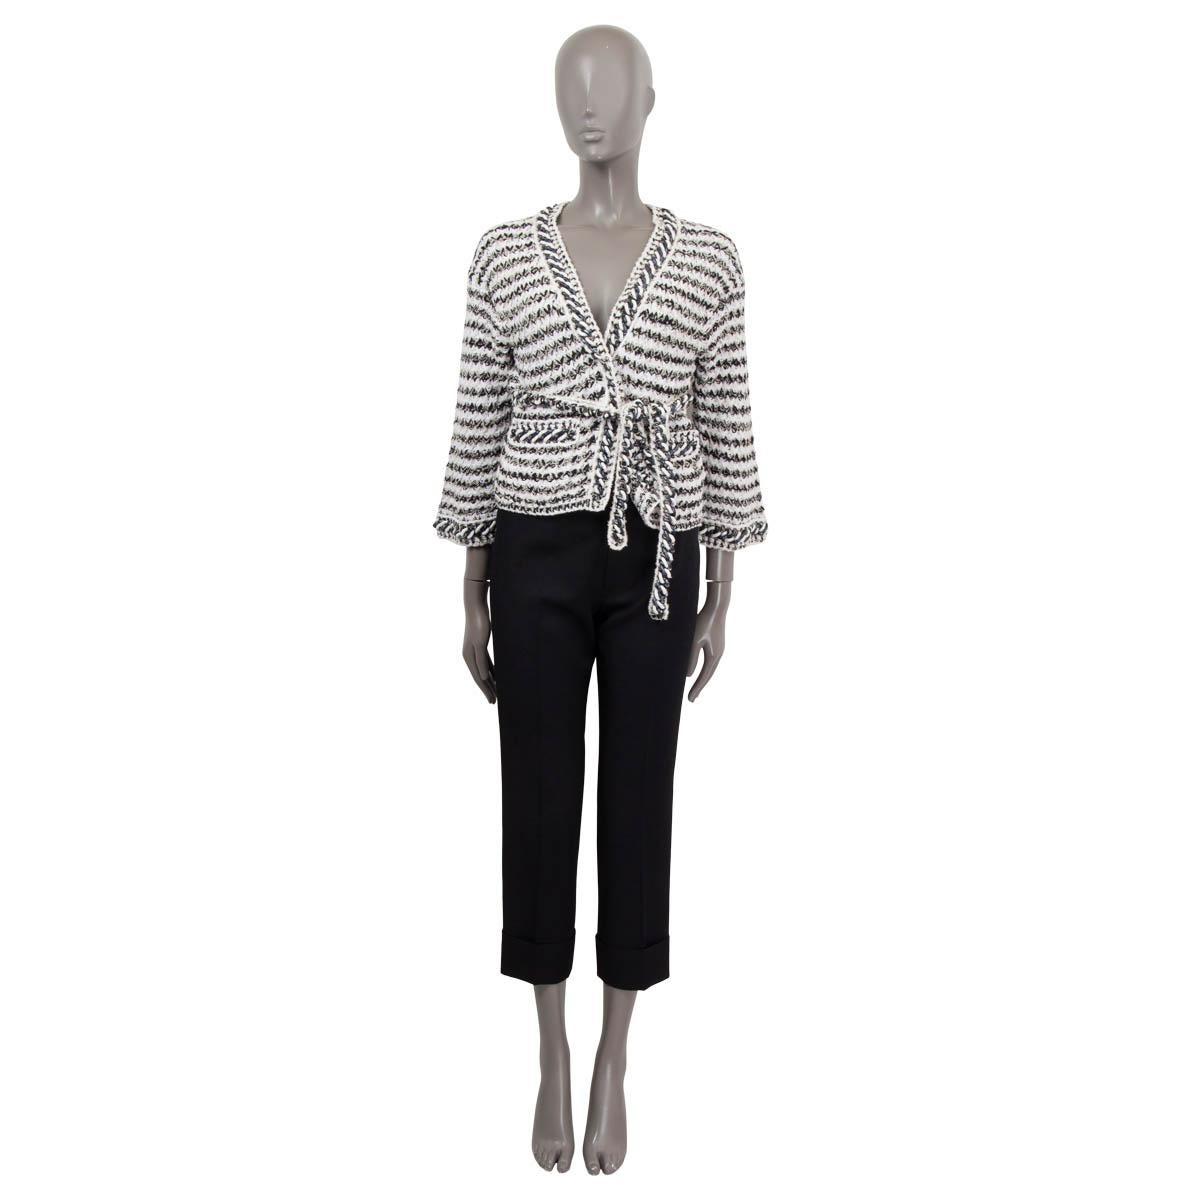 100% authentic Chanel striped knit jacket in black, white and ivory cotton (77%) and polyamide (23%). Features grey and white chain trim in acetate and has two classic chain embellished patch-pockets at front. Closes with a self-tie belt and is